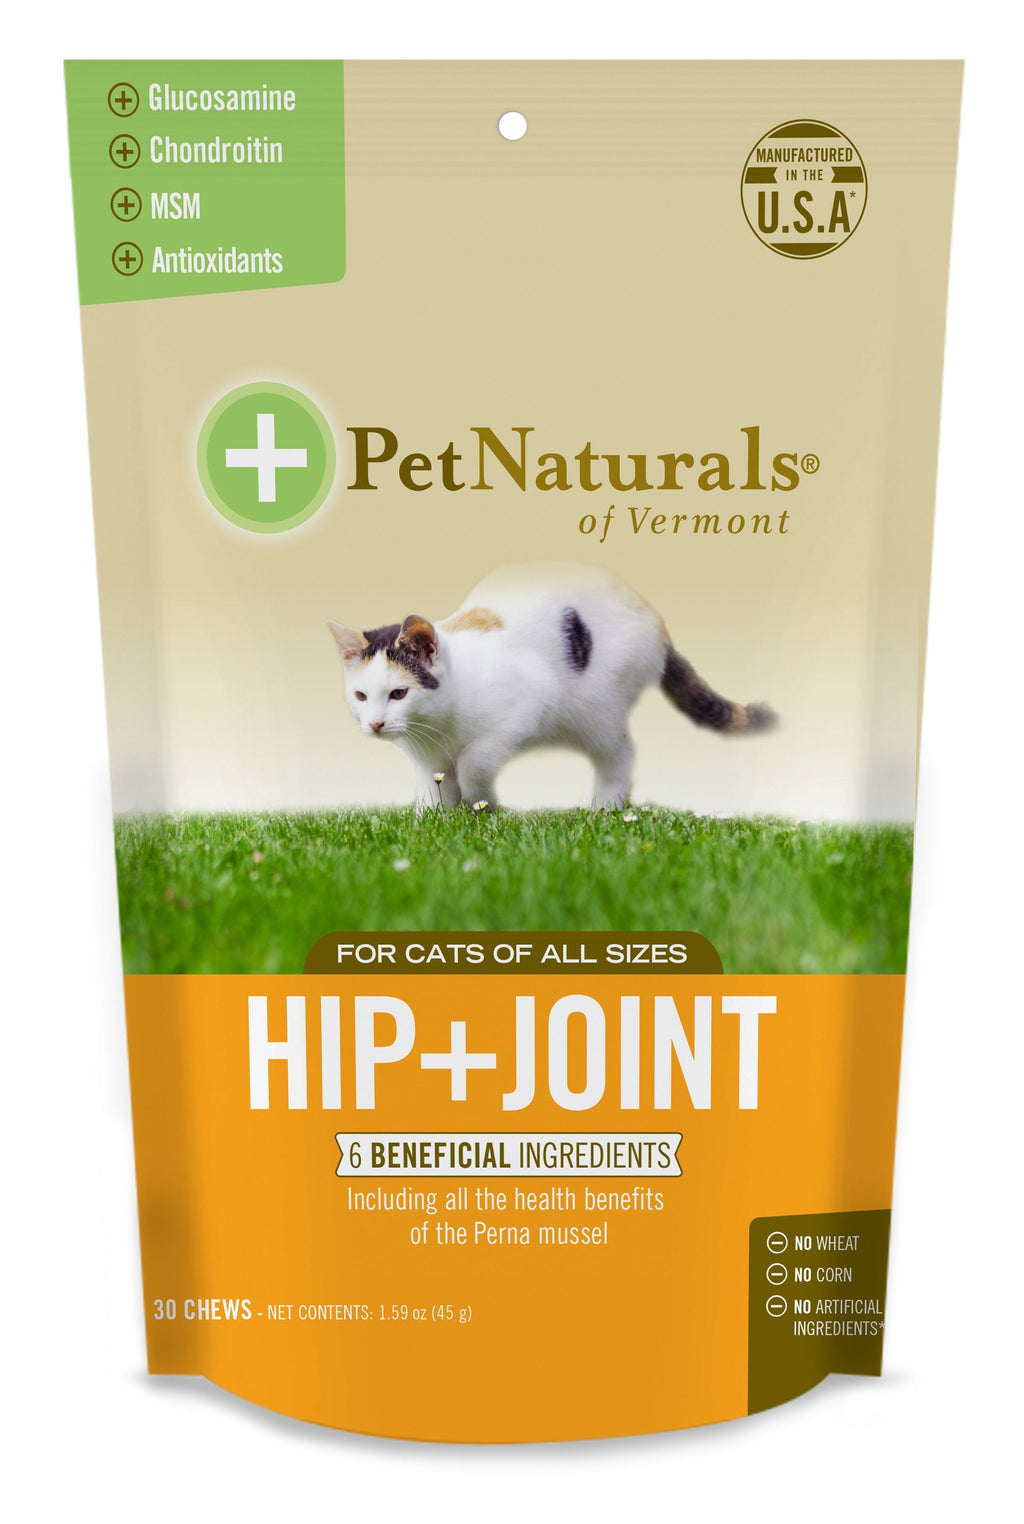 Pet Naturals of Vermont Hip & Joint Supplements for Cats - 30 ct Pouch  